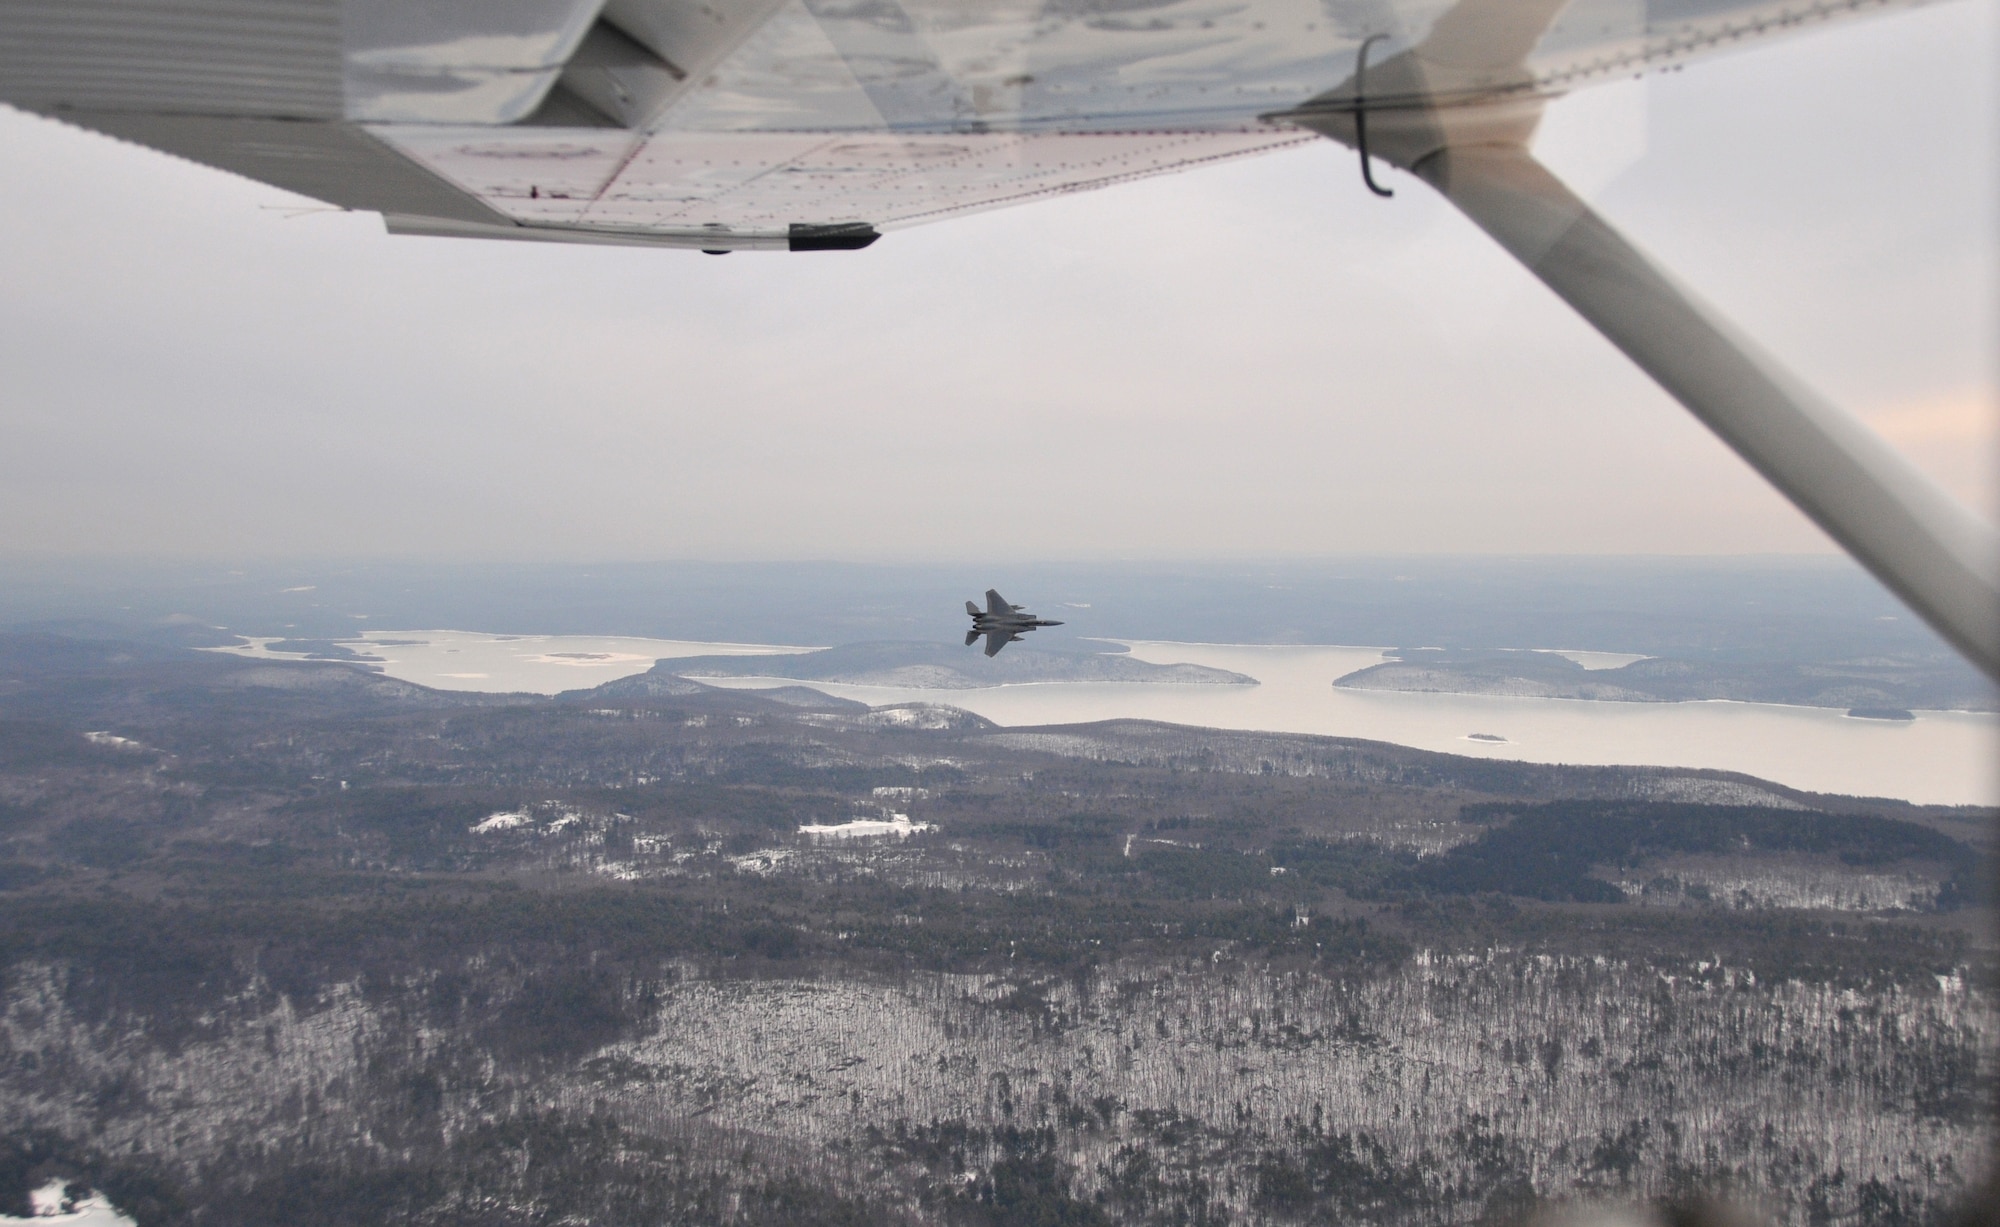 An F-15 from the 104th Fighter Wing of the Massachusetts Air National Guard is seen outside the window of a Civil Air Patrol aircraft during an intercept training mission over the White Mountains in New Hampshire. Civil Air Patrol helps Aerospace Control Alert units train for scrambles and intercepts by providing a track of interest. (Courtesy photo)